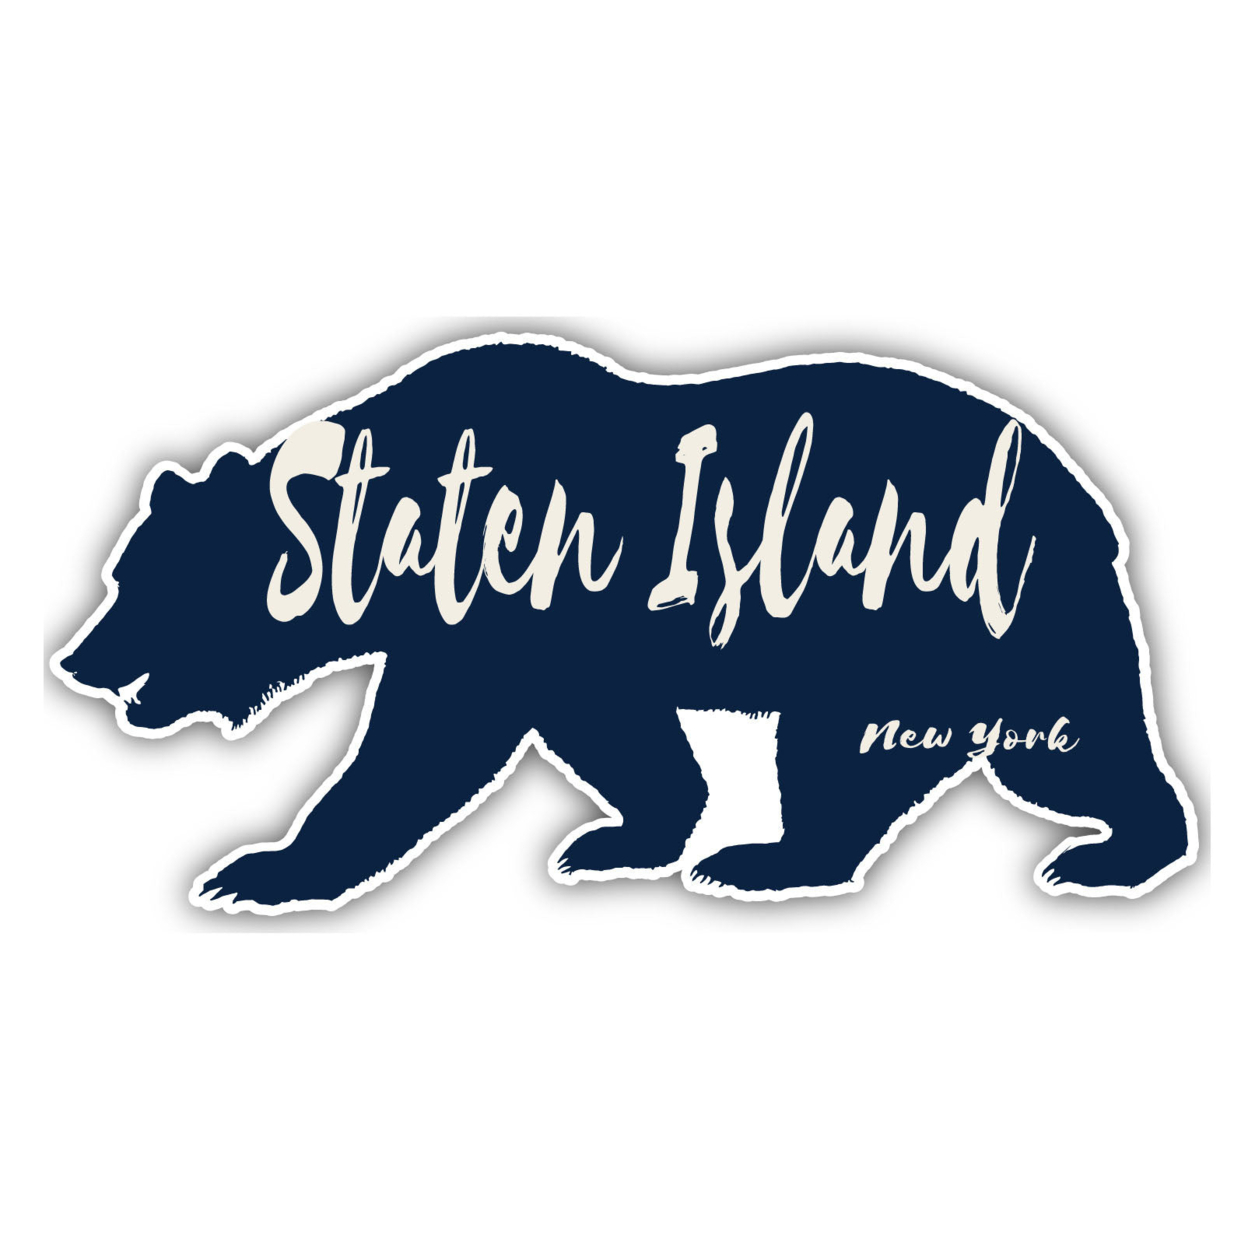 Staten Island New York Souvenir Decorative Stickers (Choose Theme And Size) - Single Unit, 4-Inch, Great Outdoors